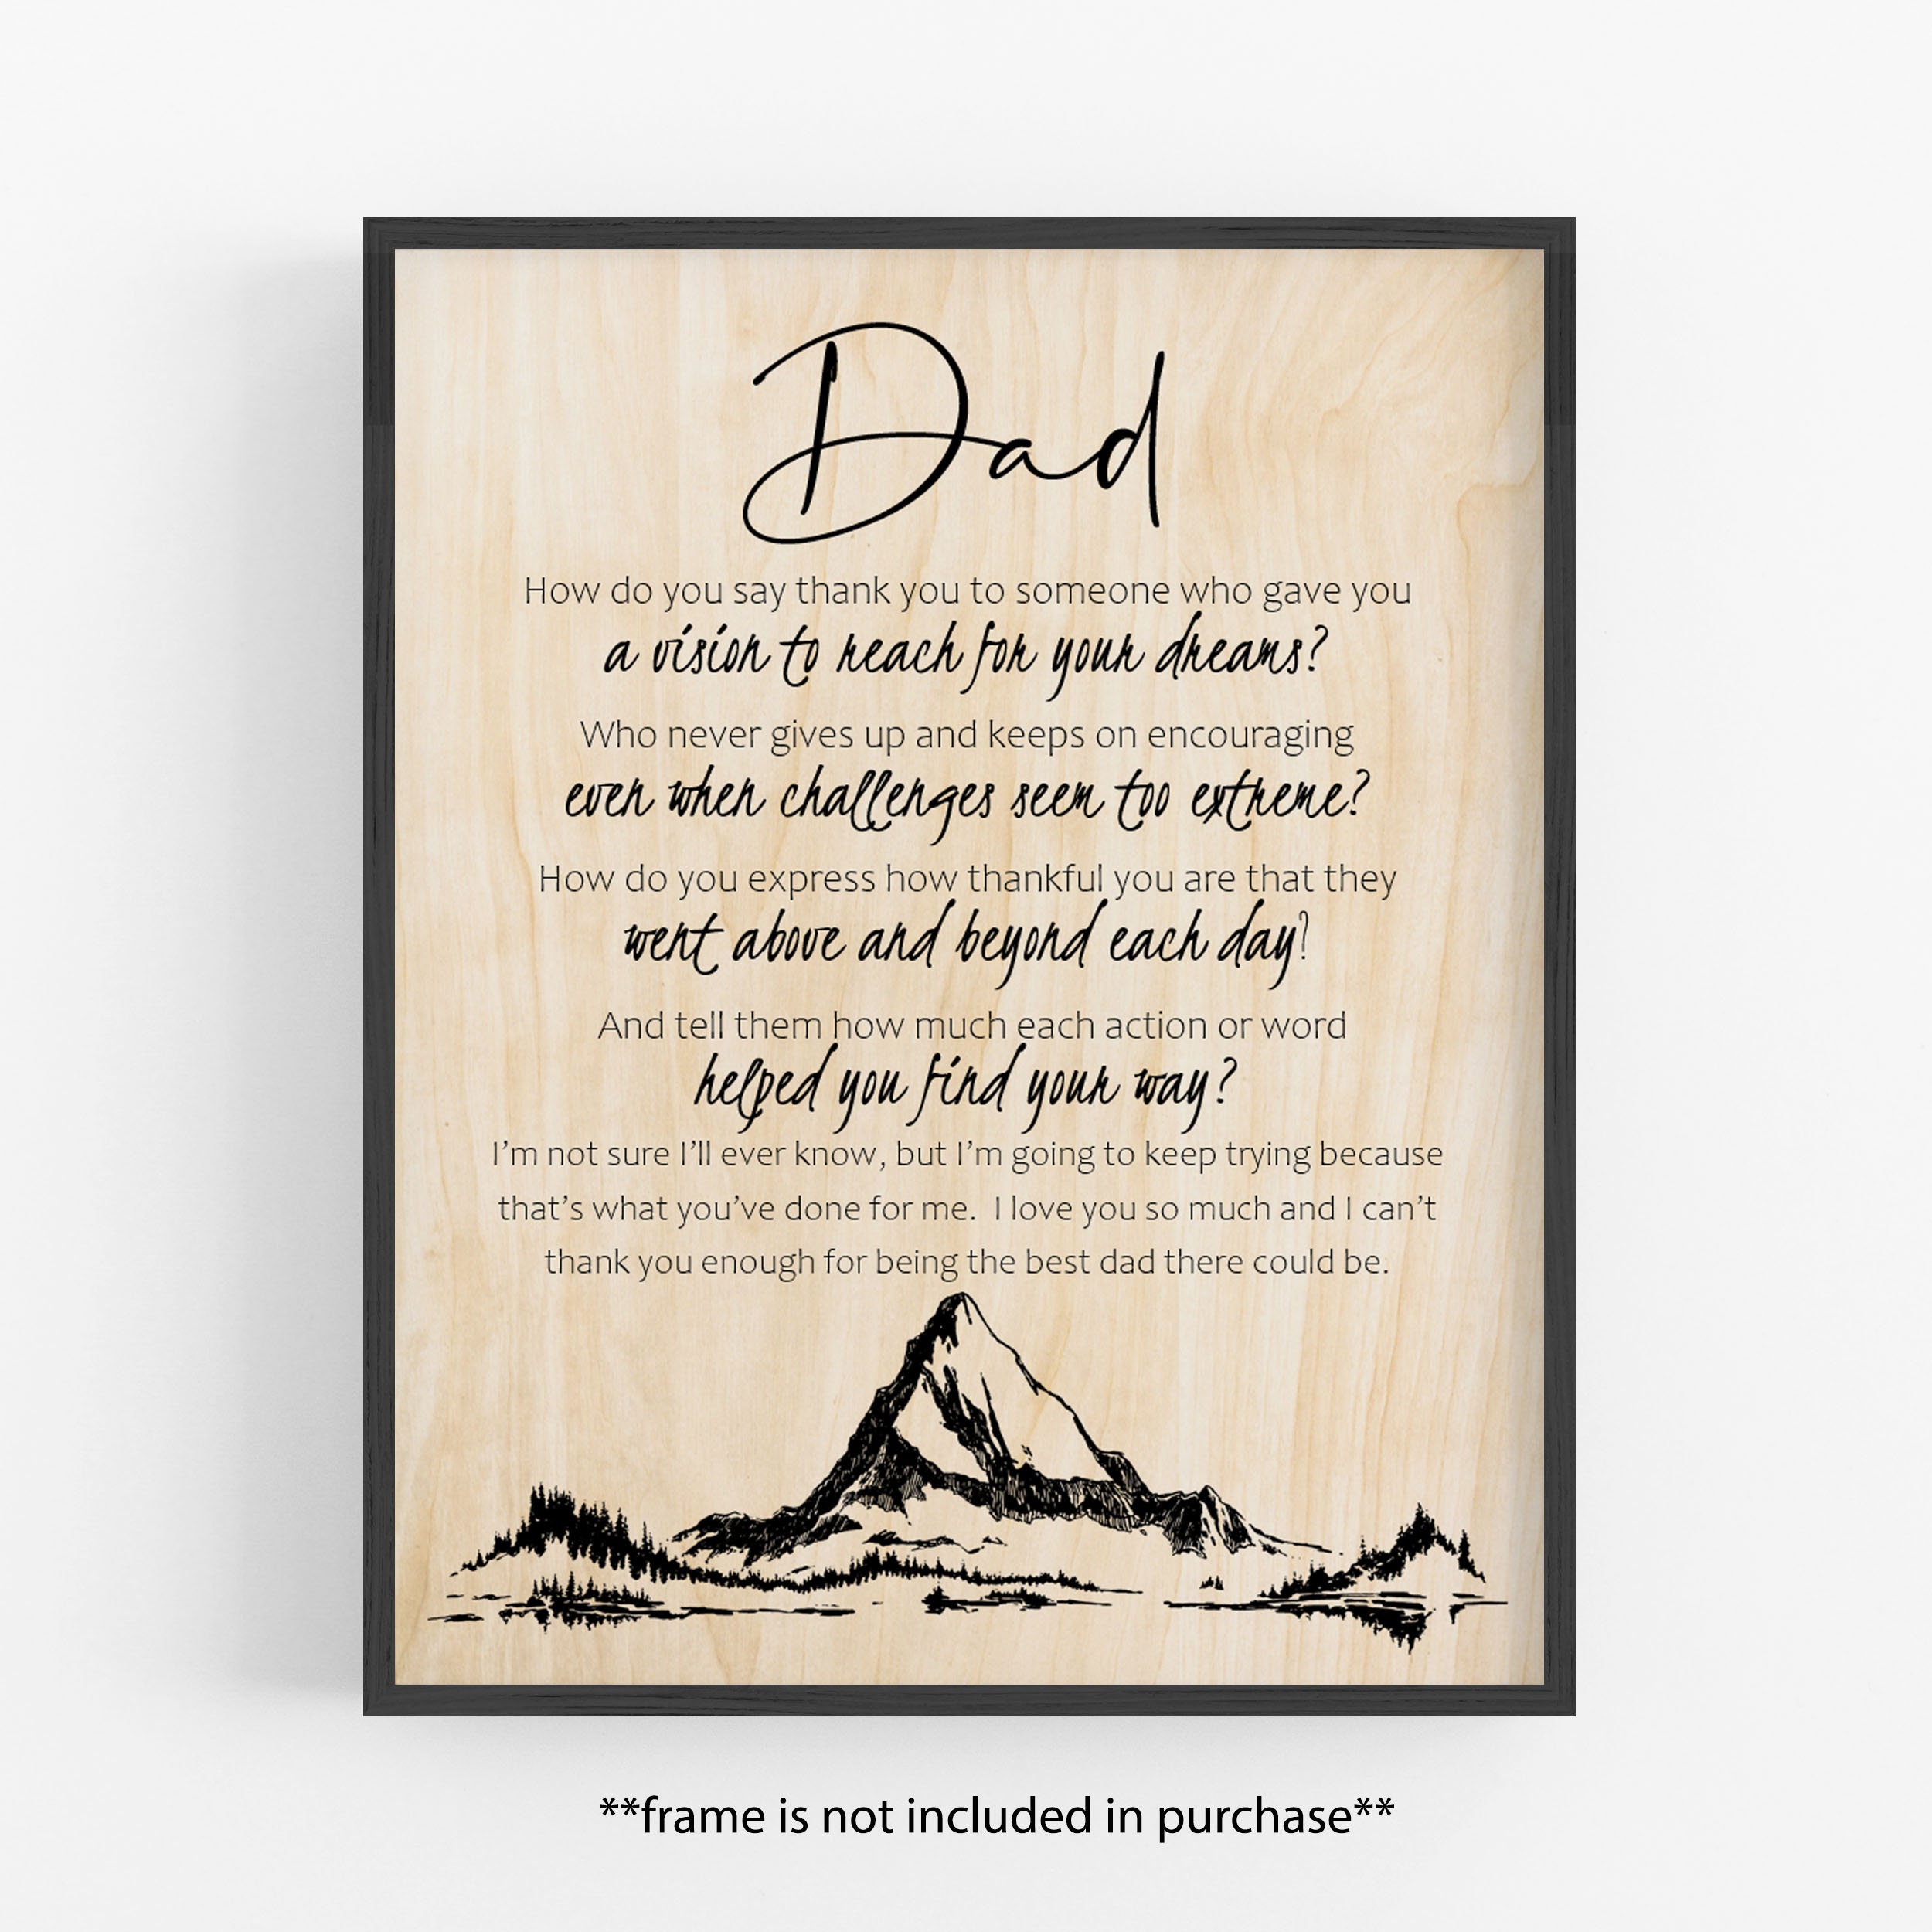 WSYEAR Daughter Gifts from Dad - Gifts for Daughter from Dad,Valentines Day  Birthday Gifts for Adult Daughter,Table Lamp Father to Daughter Gifts for